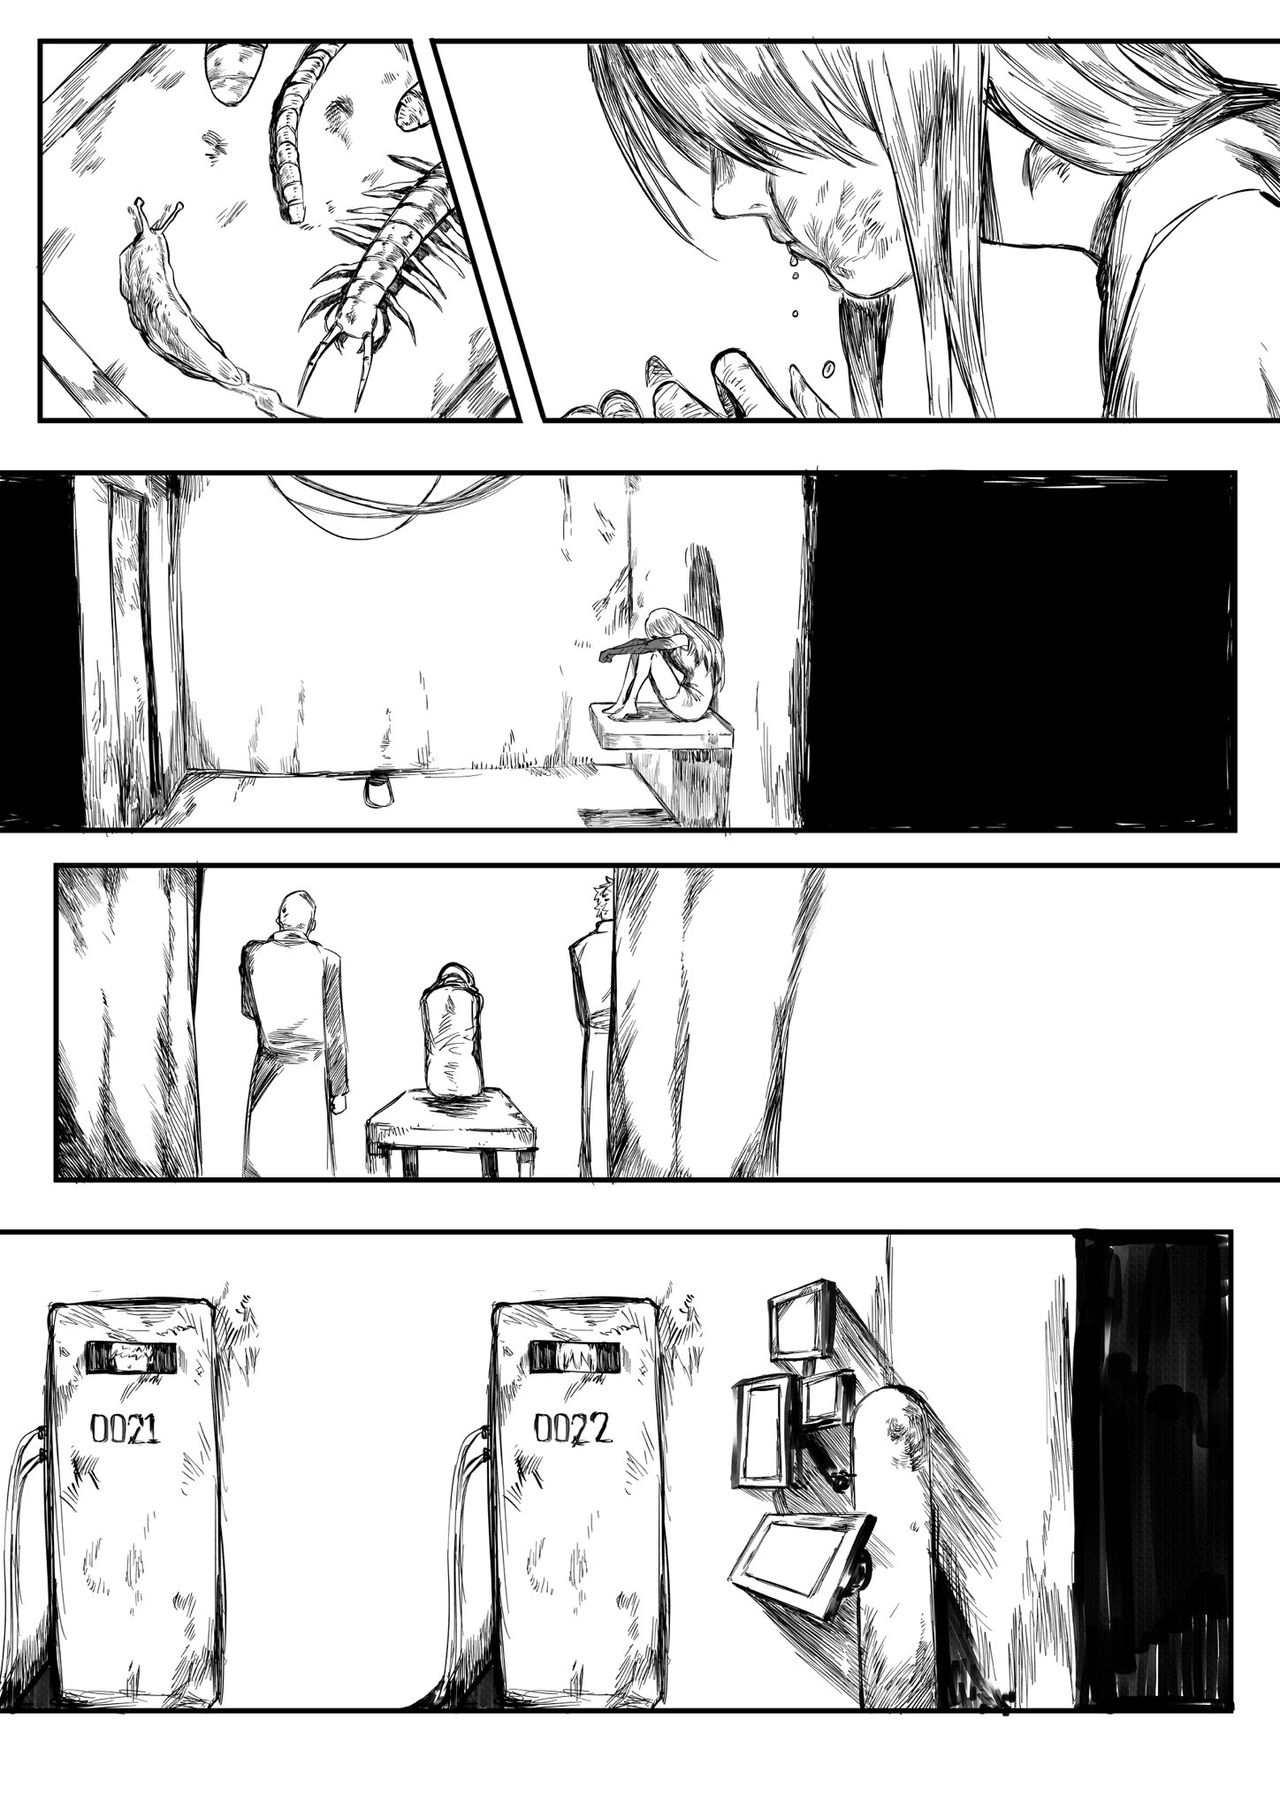 [NeighbourH] The Story of an Imprisoned Girl ch.1 [English] 18